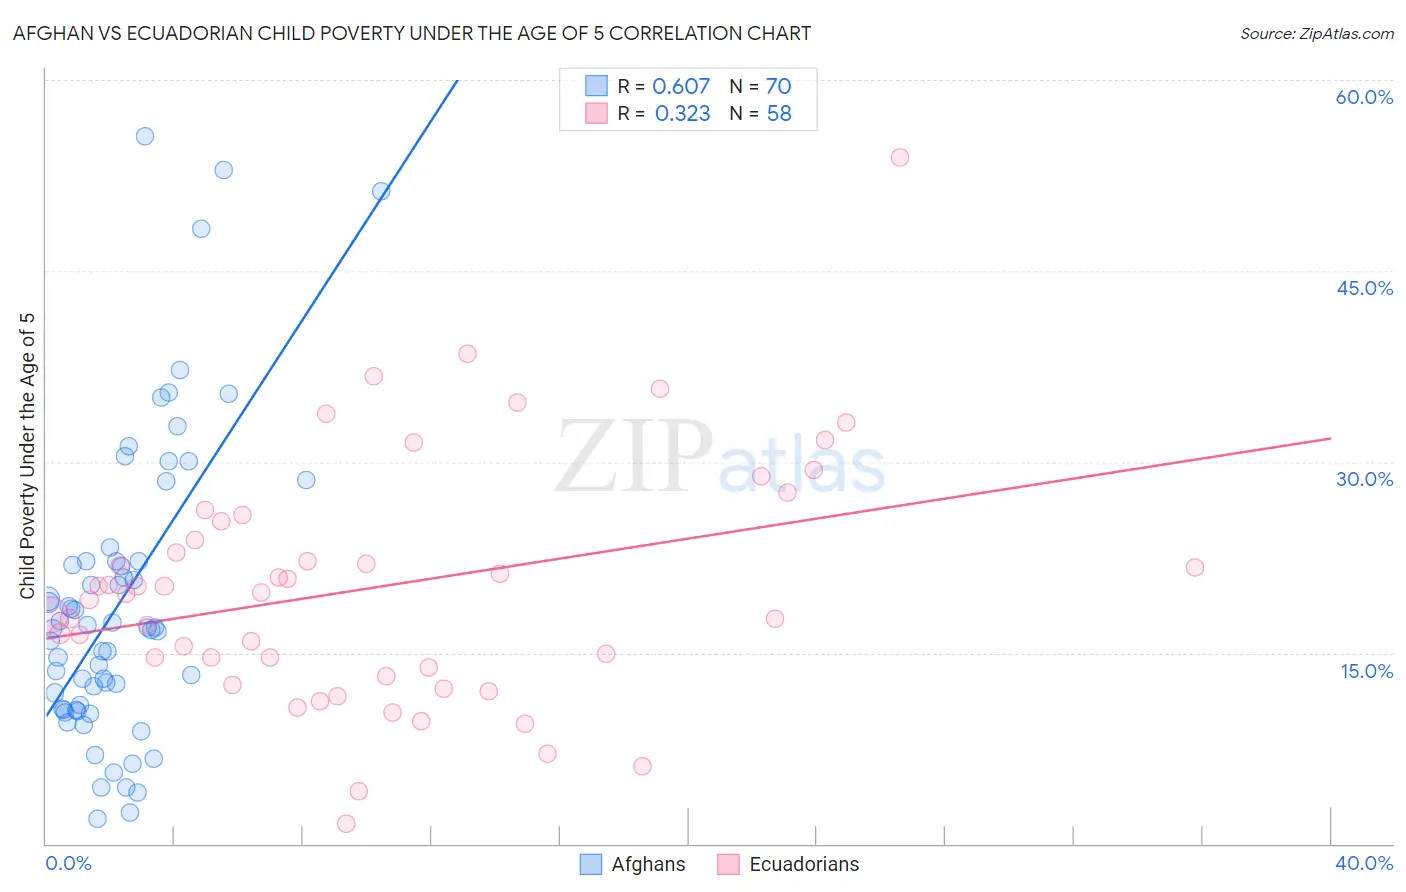 Afghan vs Ecuadorian Child Poverty Under the Age of 5